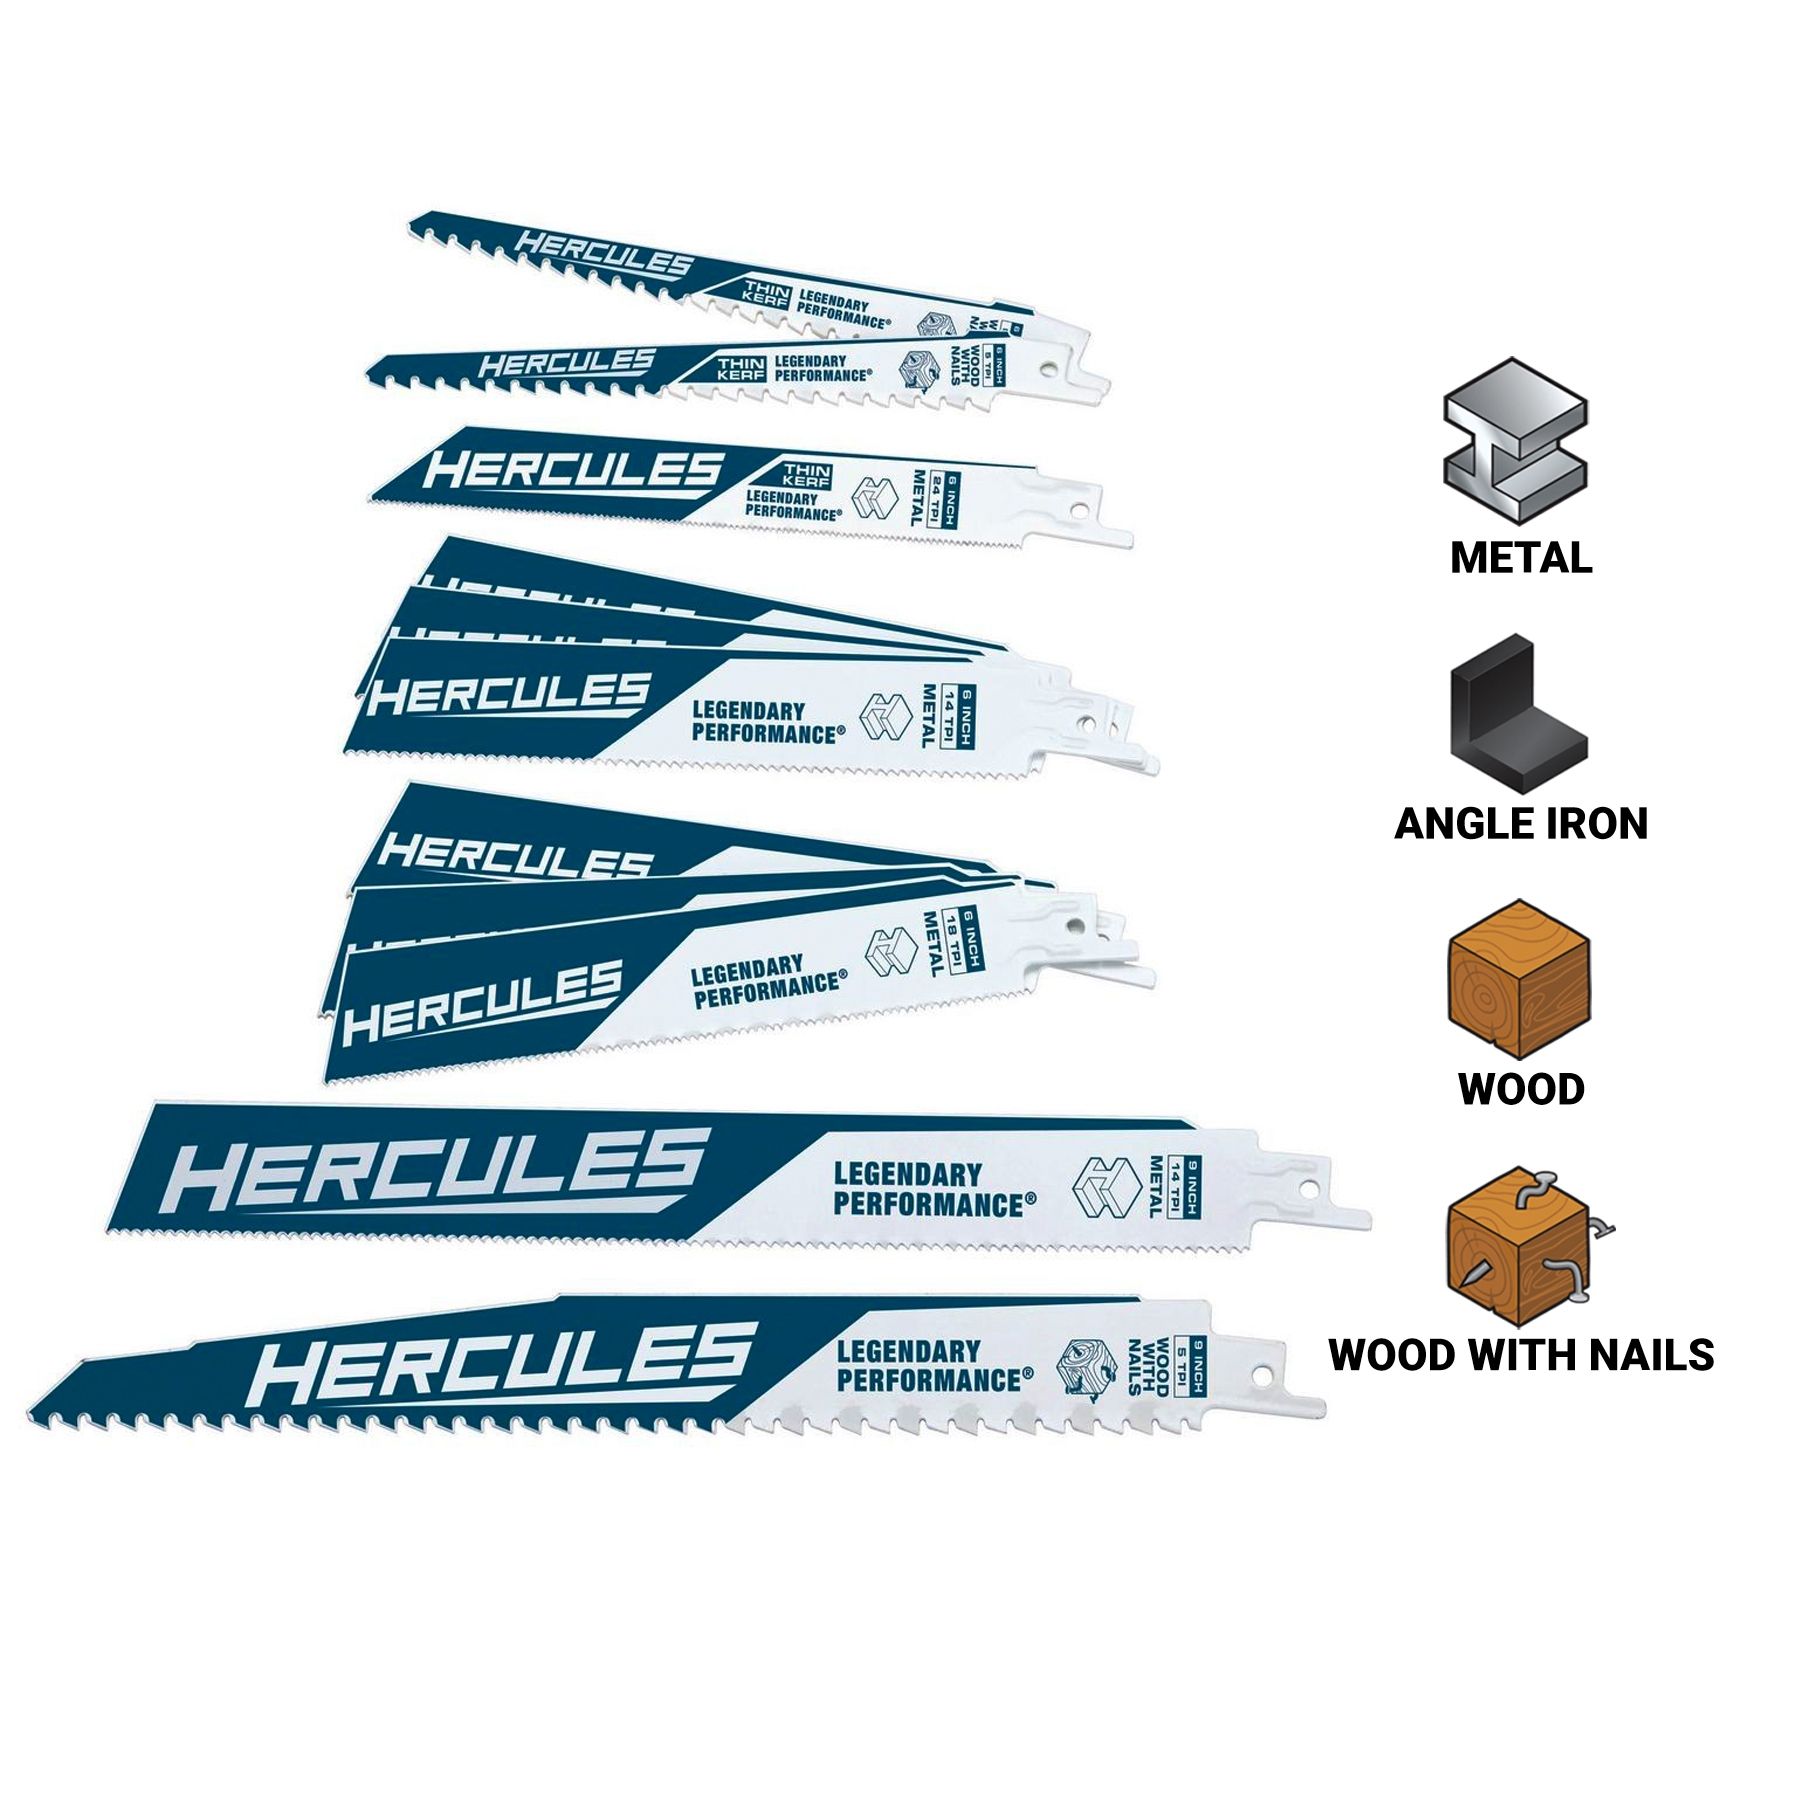 HERCULES Demo and Thin Kerf Reciprocating Saw Blade Set, 12 Piece